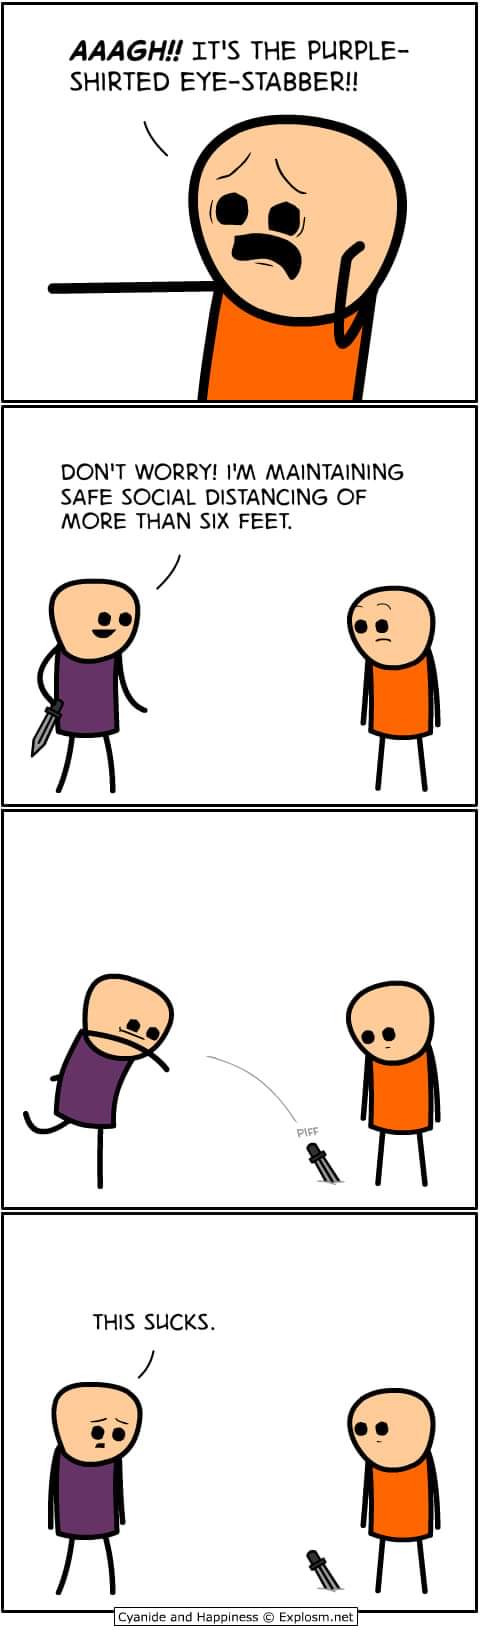 The Cyanide & Happiness appreciation thread - Page 180 - The Lounge - PistonHeads